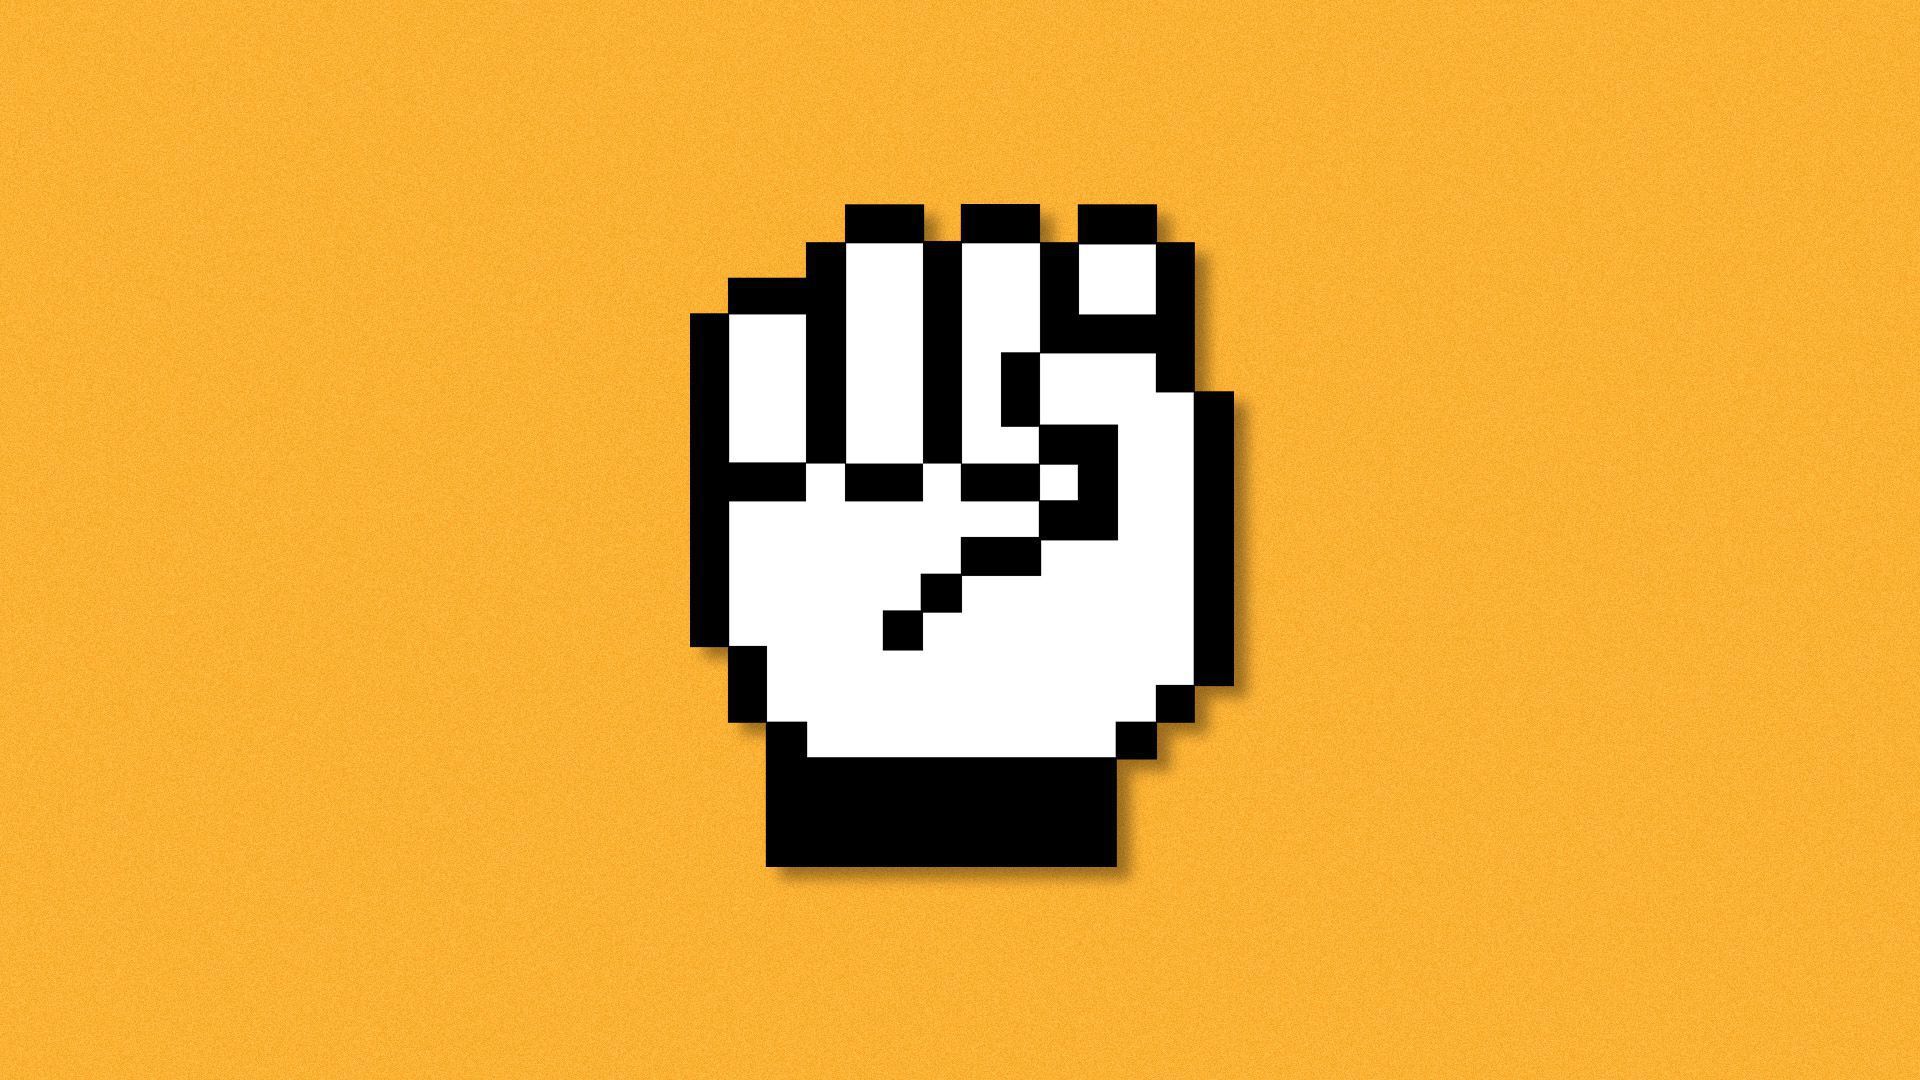 Illustration of a mouse cursor that forms a raised fist